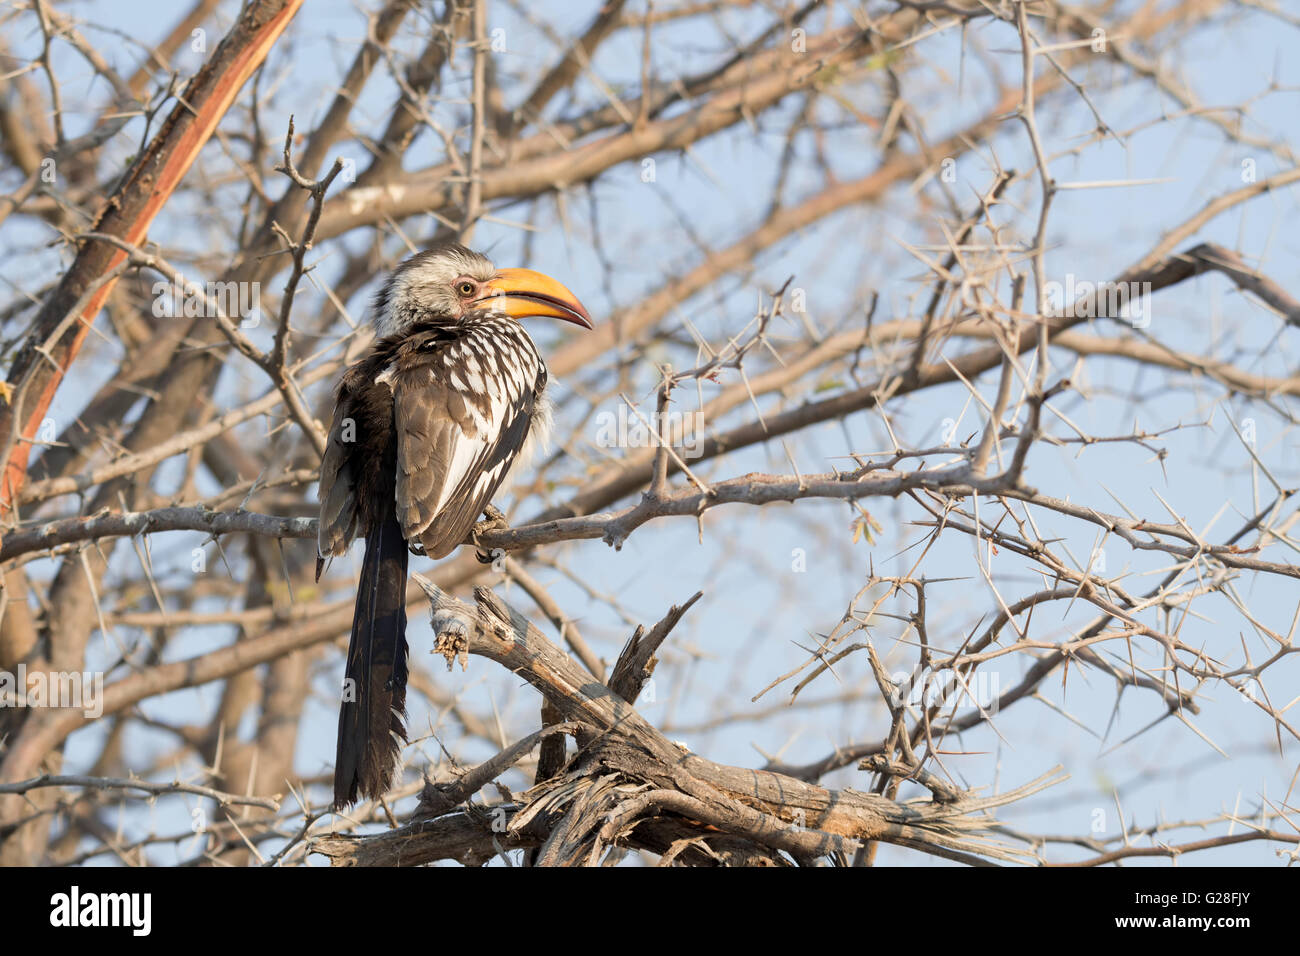 Southern yellow-billed hornbill (Tockus leucomelas) perched on a branch in Etosha National Park, Namibia Stock Photo